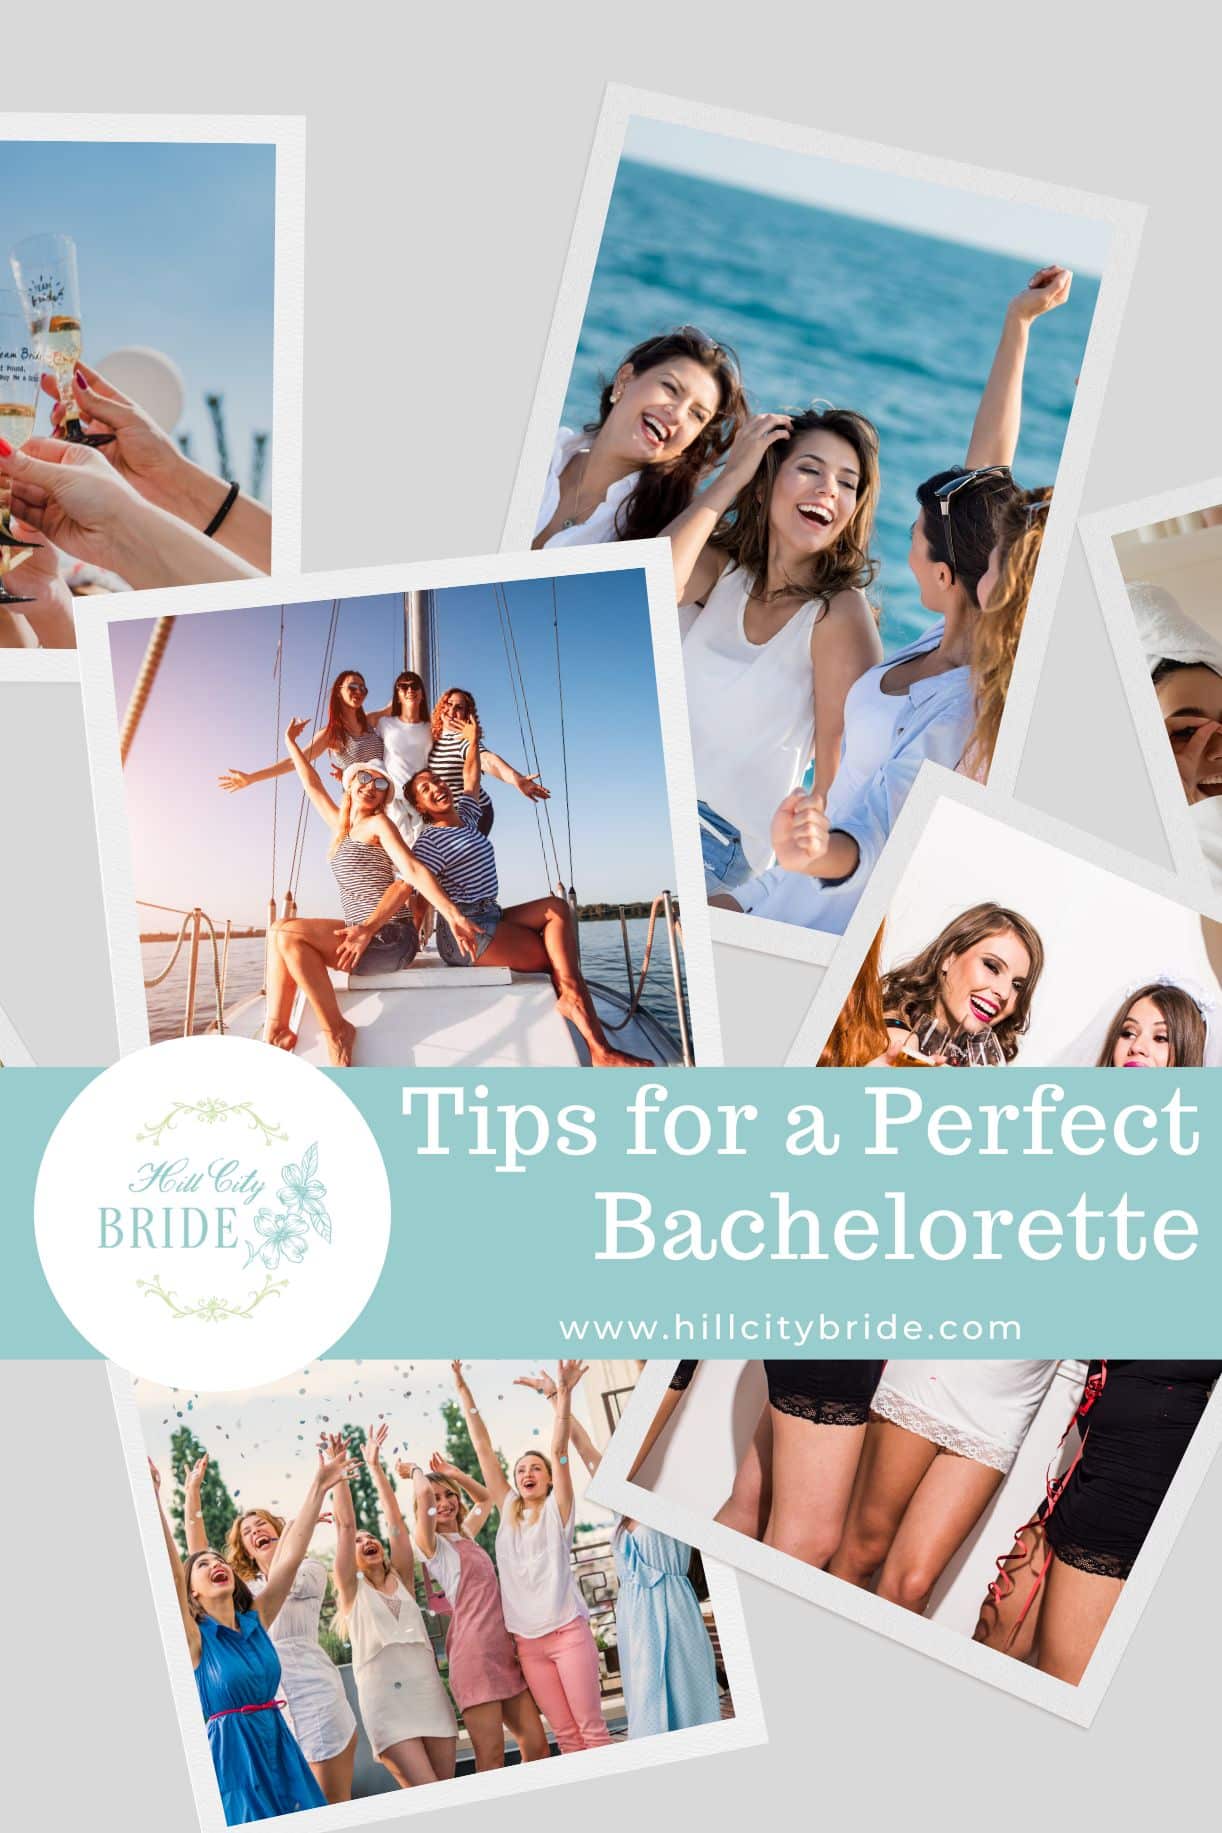 How to Plan the Ultimate Bachelorette Party